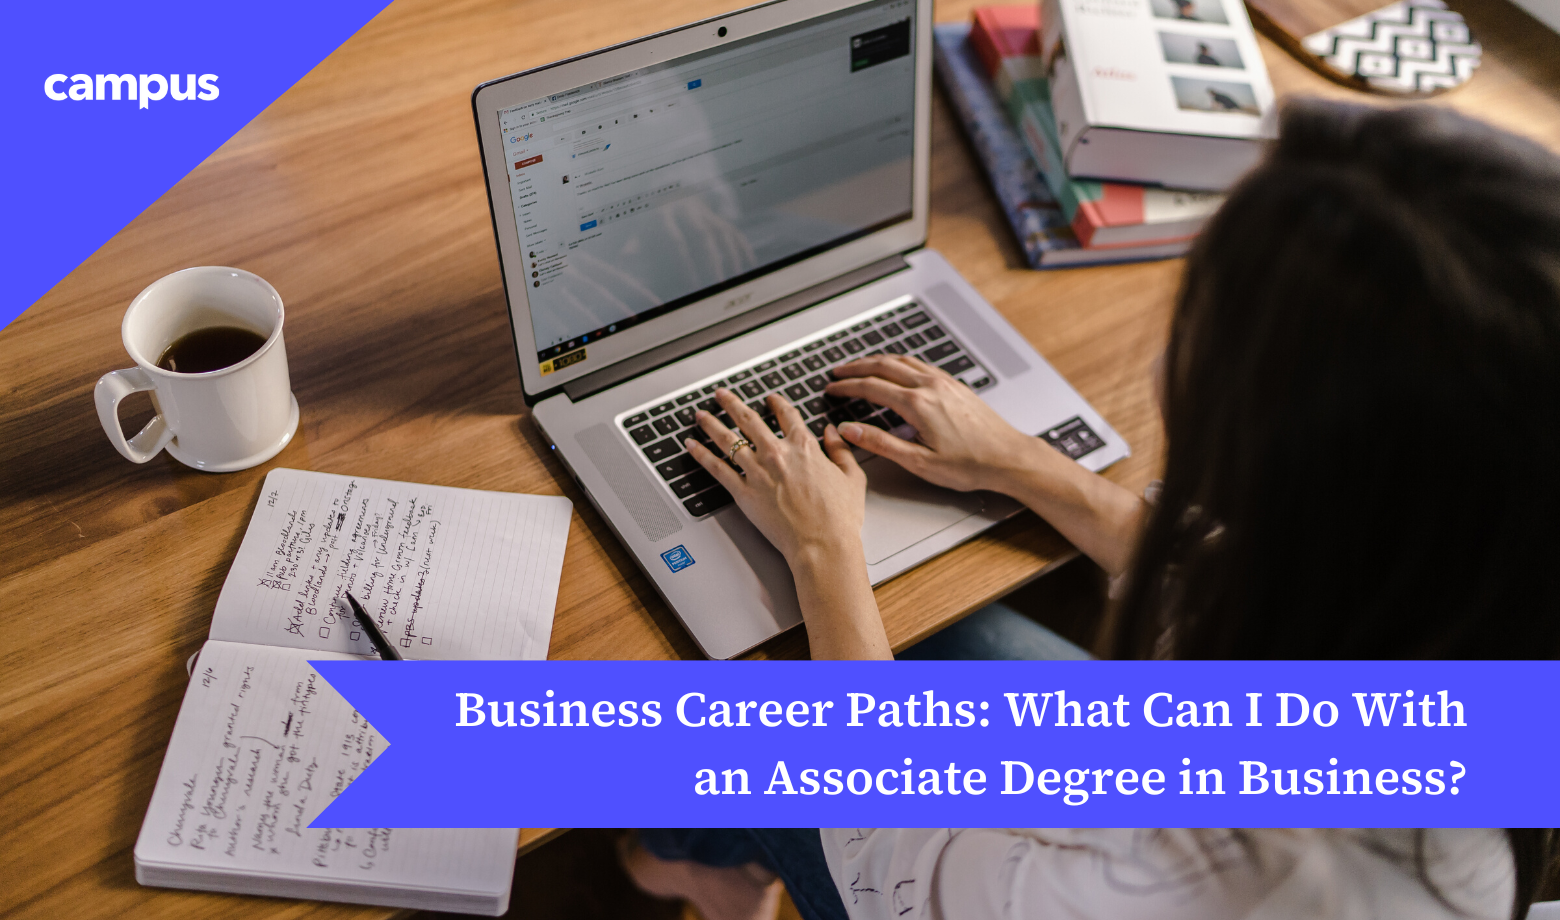 Business Career Paths: What Can I Do With an Associate Degree in Business?